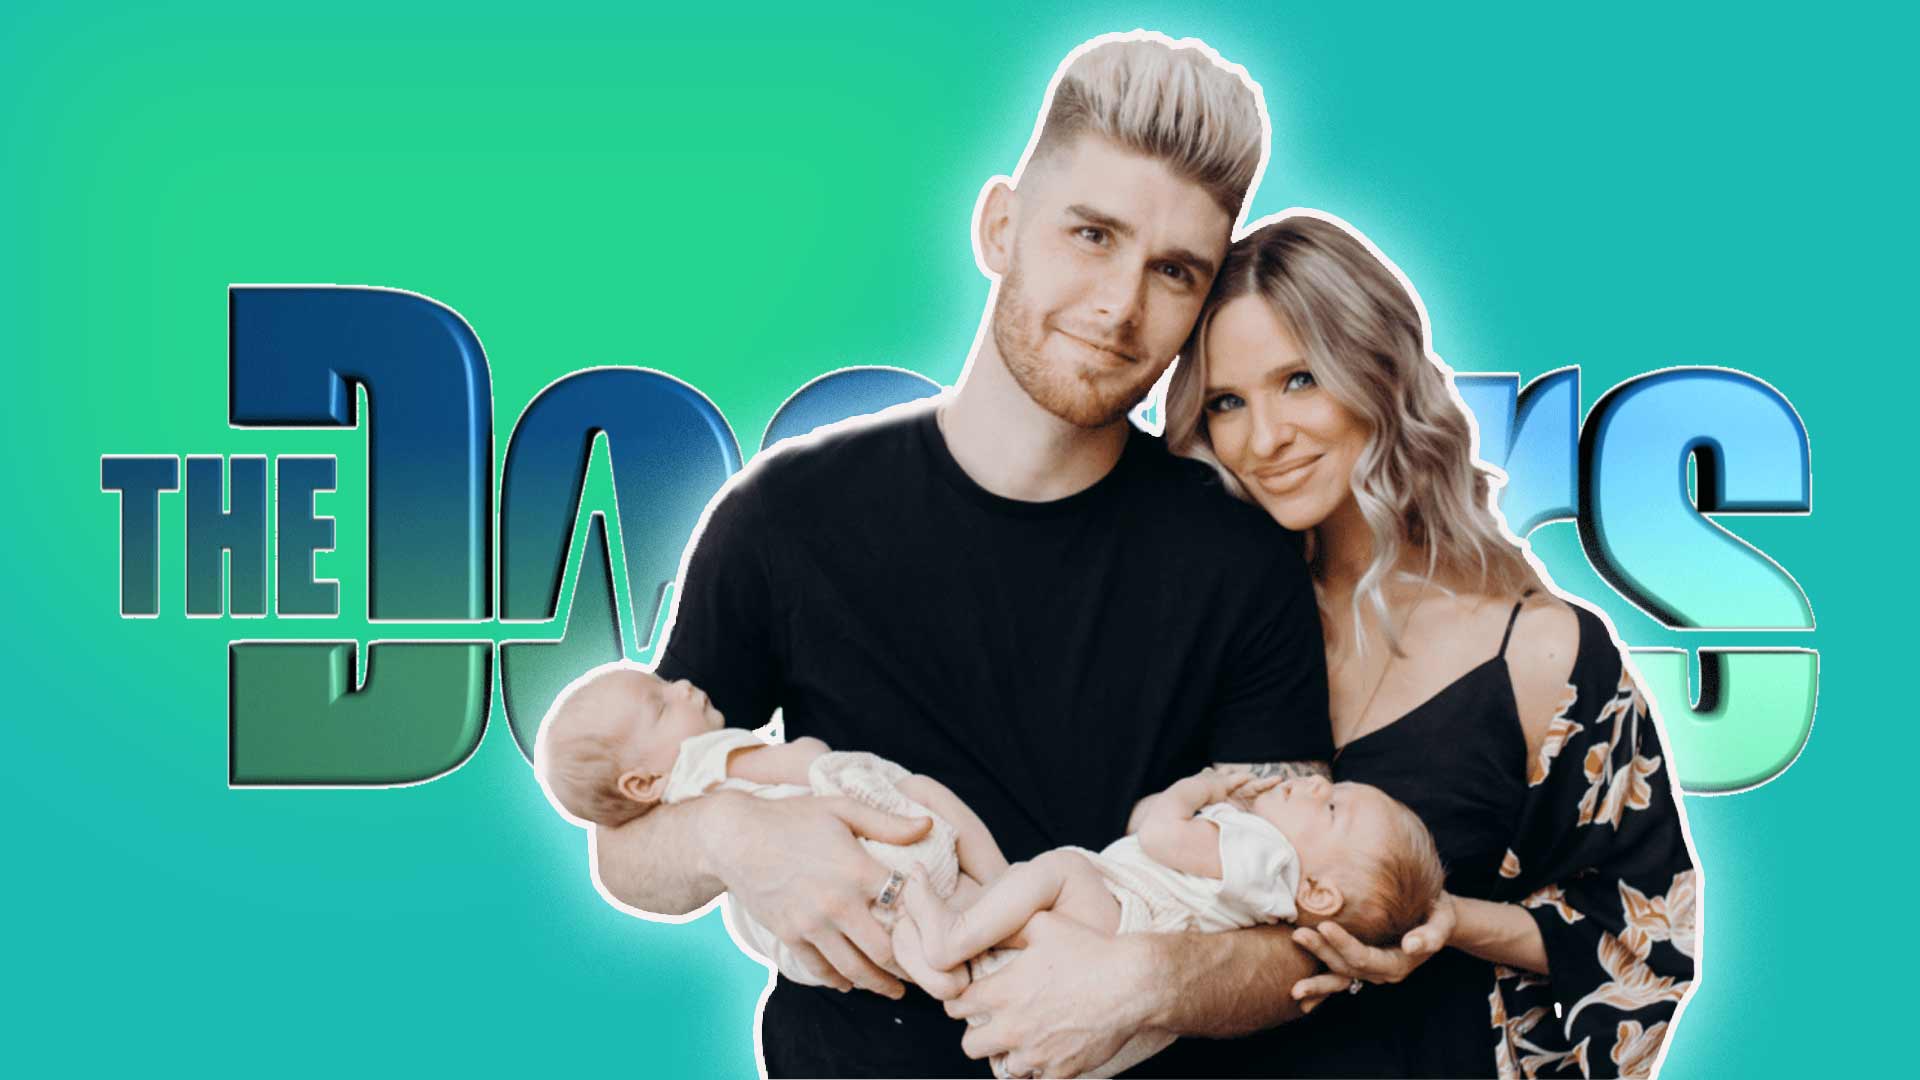 Annie & Colton Dixon Hold Their Baby Girls in front of a "The Doctors" tv show logo